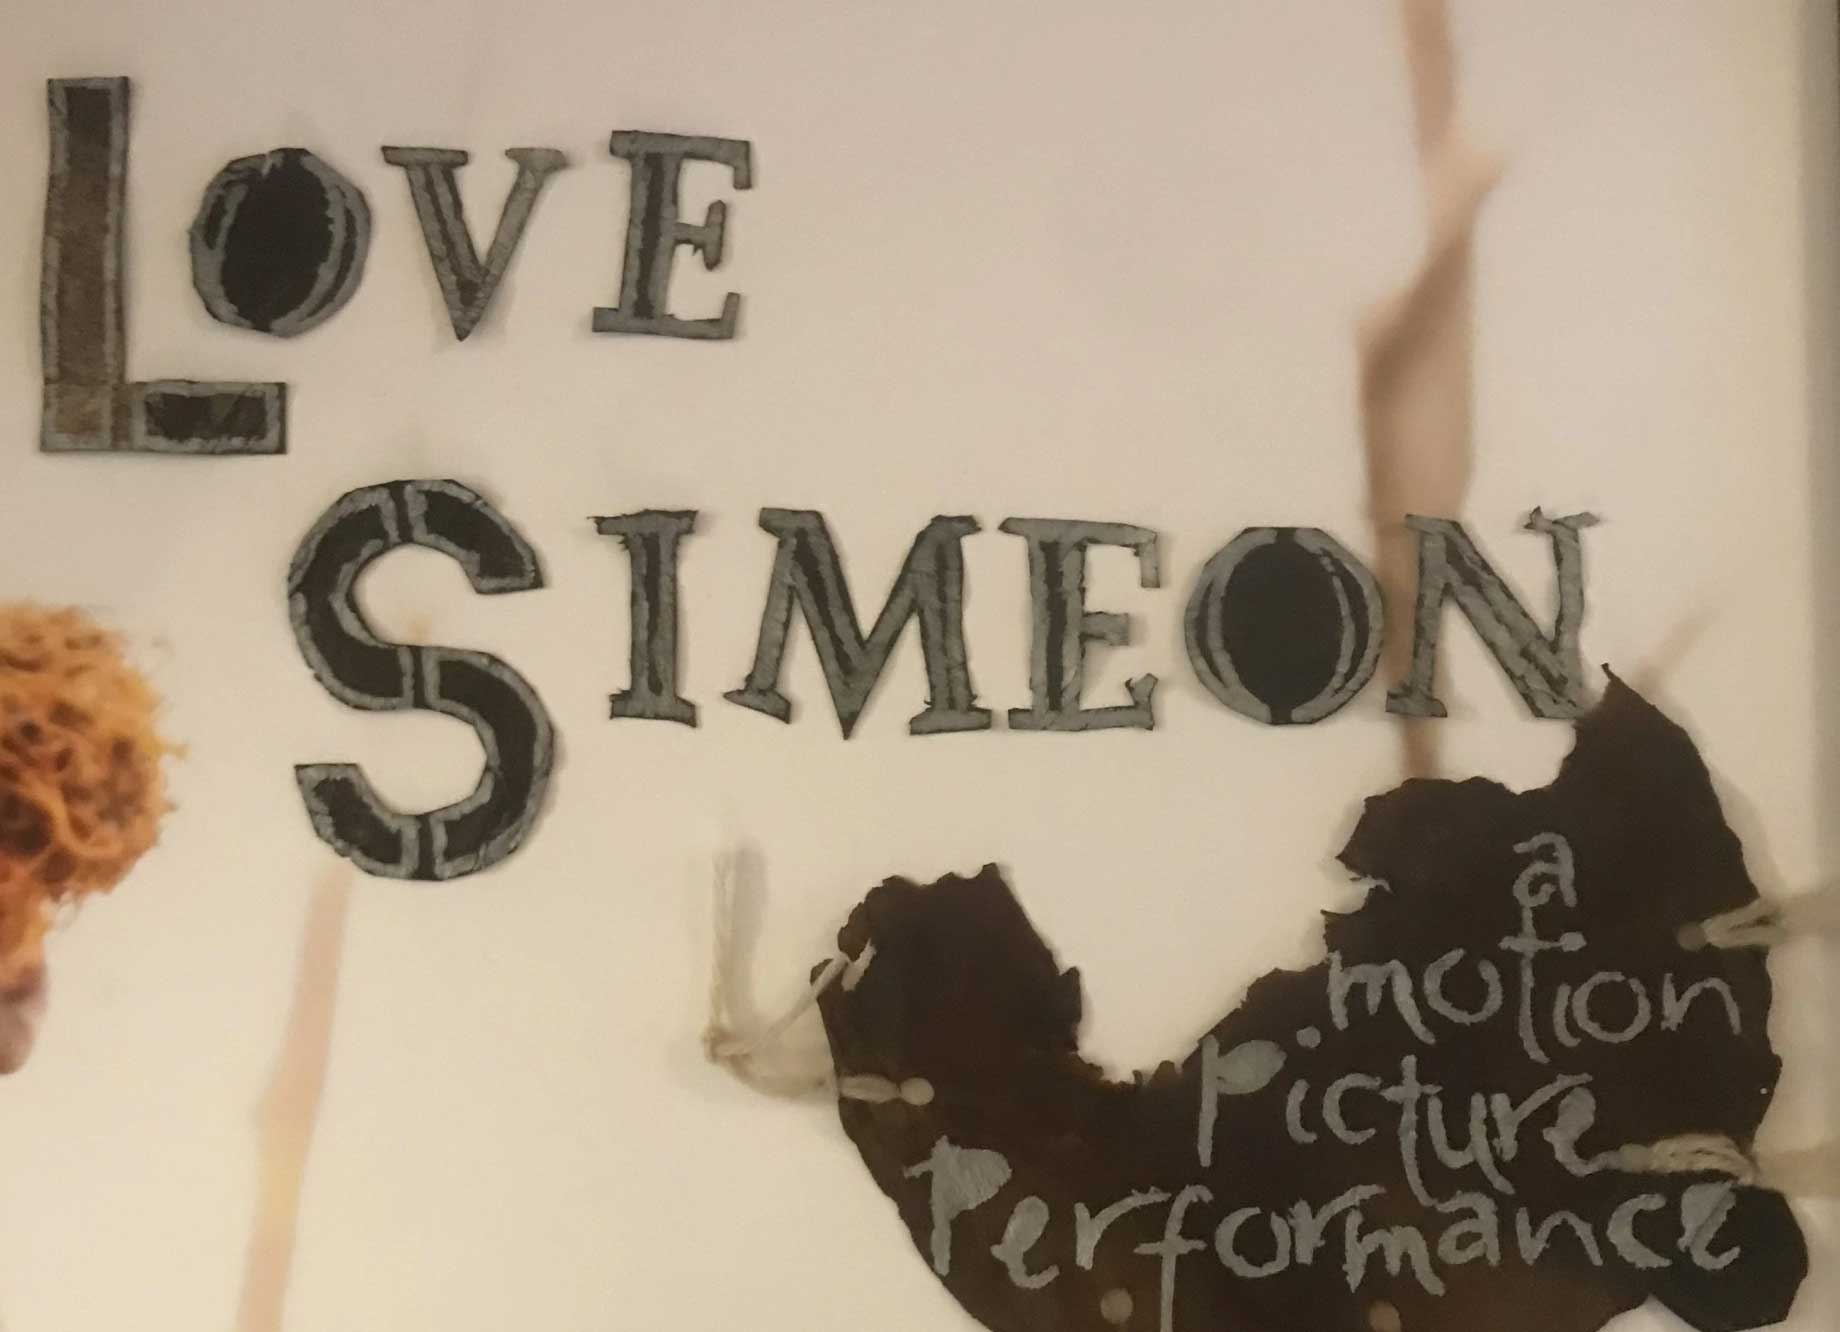 Torn paper image with the words "Love, Simeon - a motion picture performance" in charmingly handmade lettering.